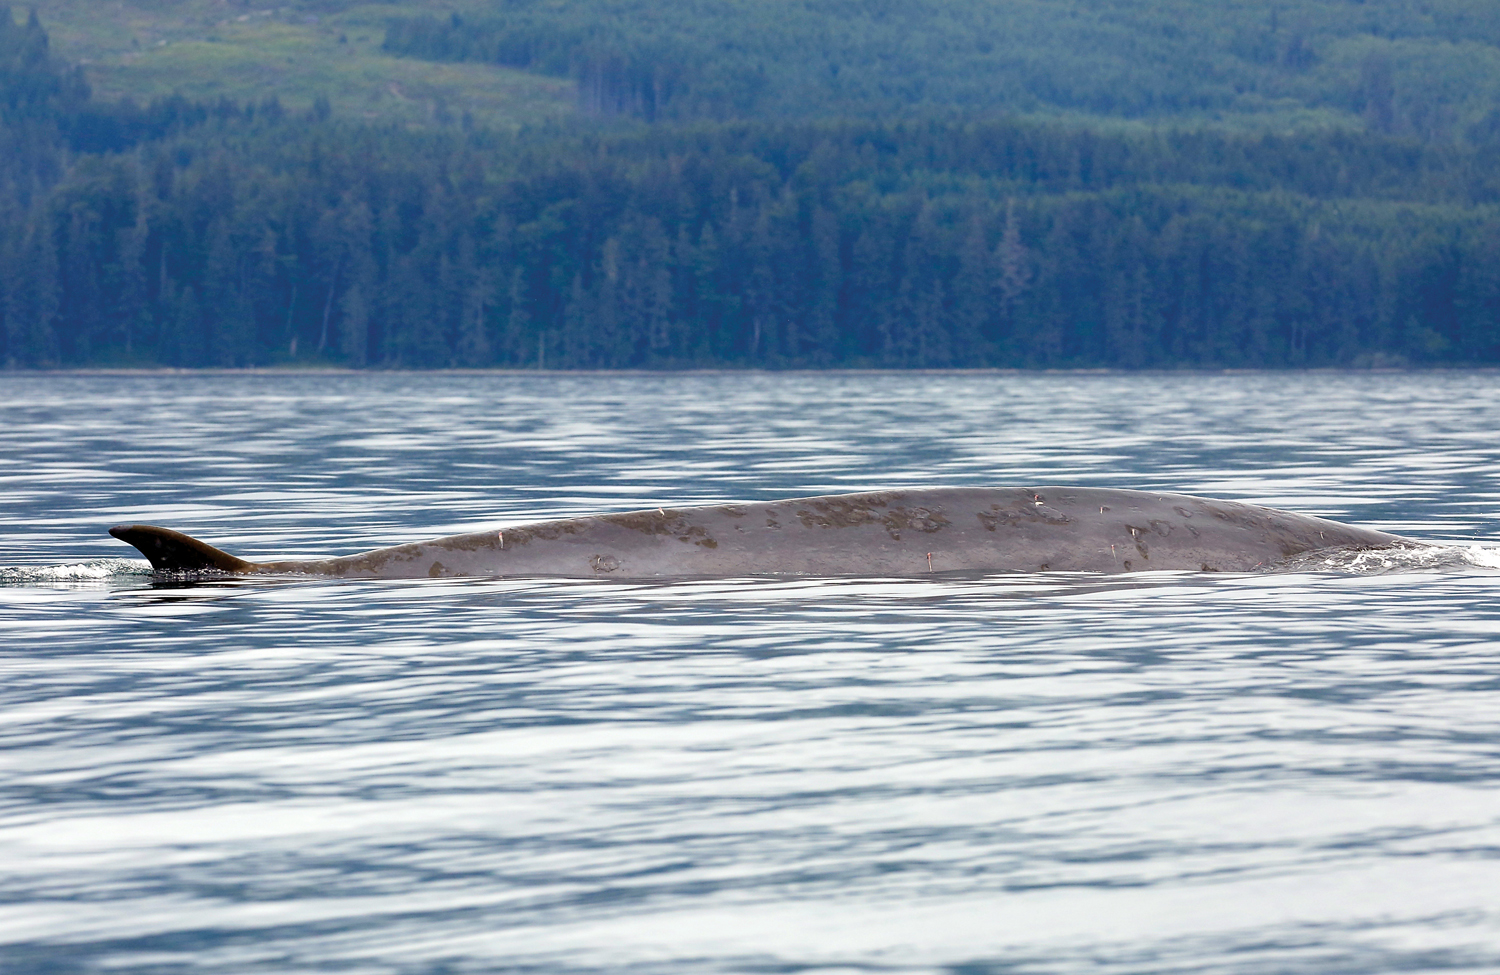 A fin whale surfaces northeast of Dungeness Spit on July 15